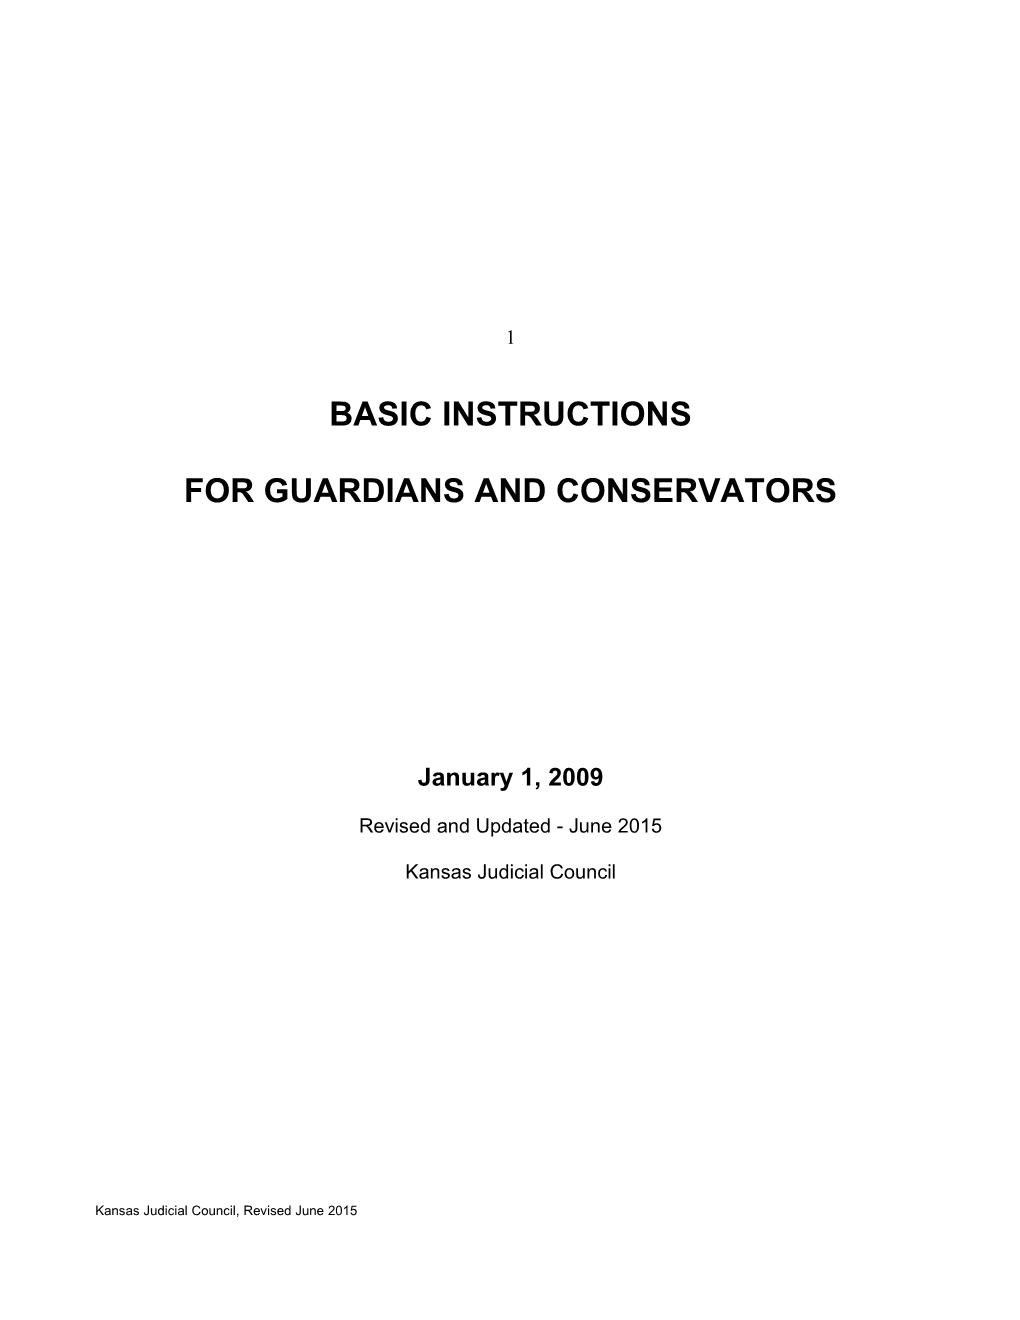 For Guardians and Conservators